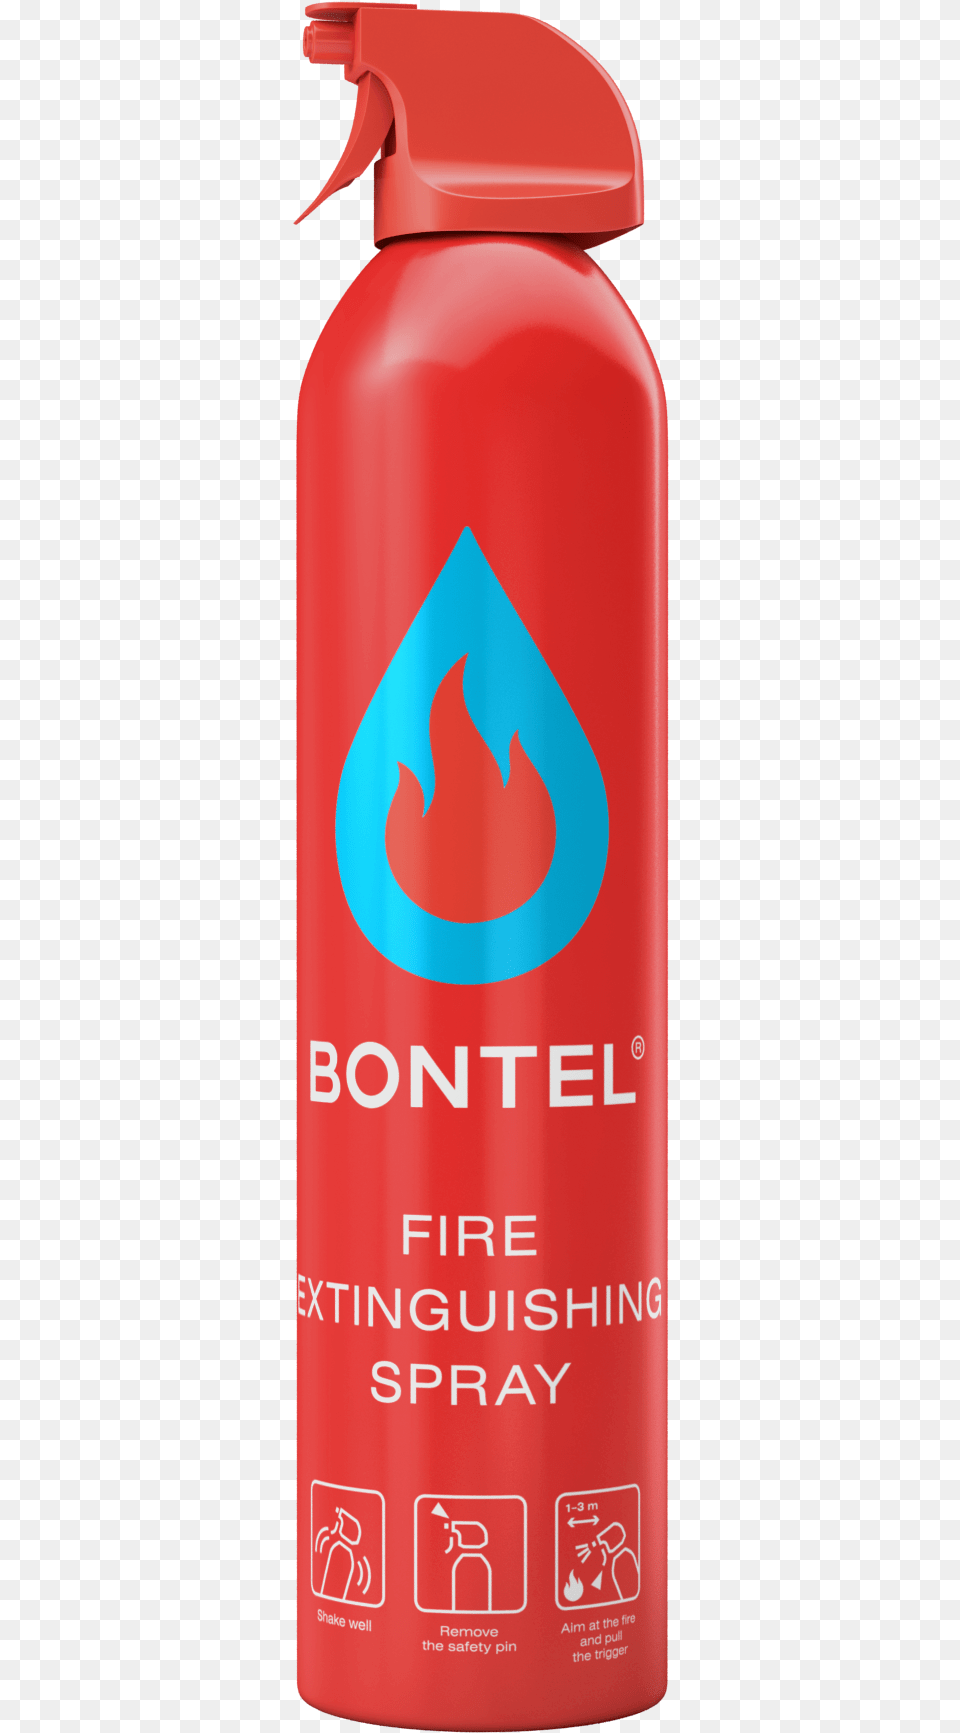 Fire Extinguishing Spray Spray Fire Extinguisher, Bottle, Water Bottle, Can, Tin Free Png